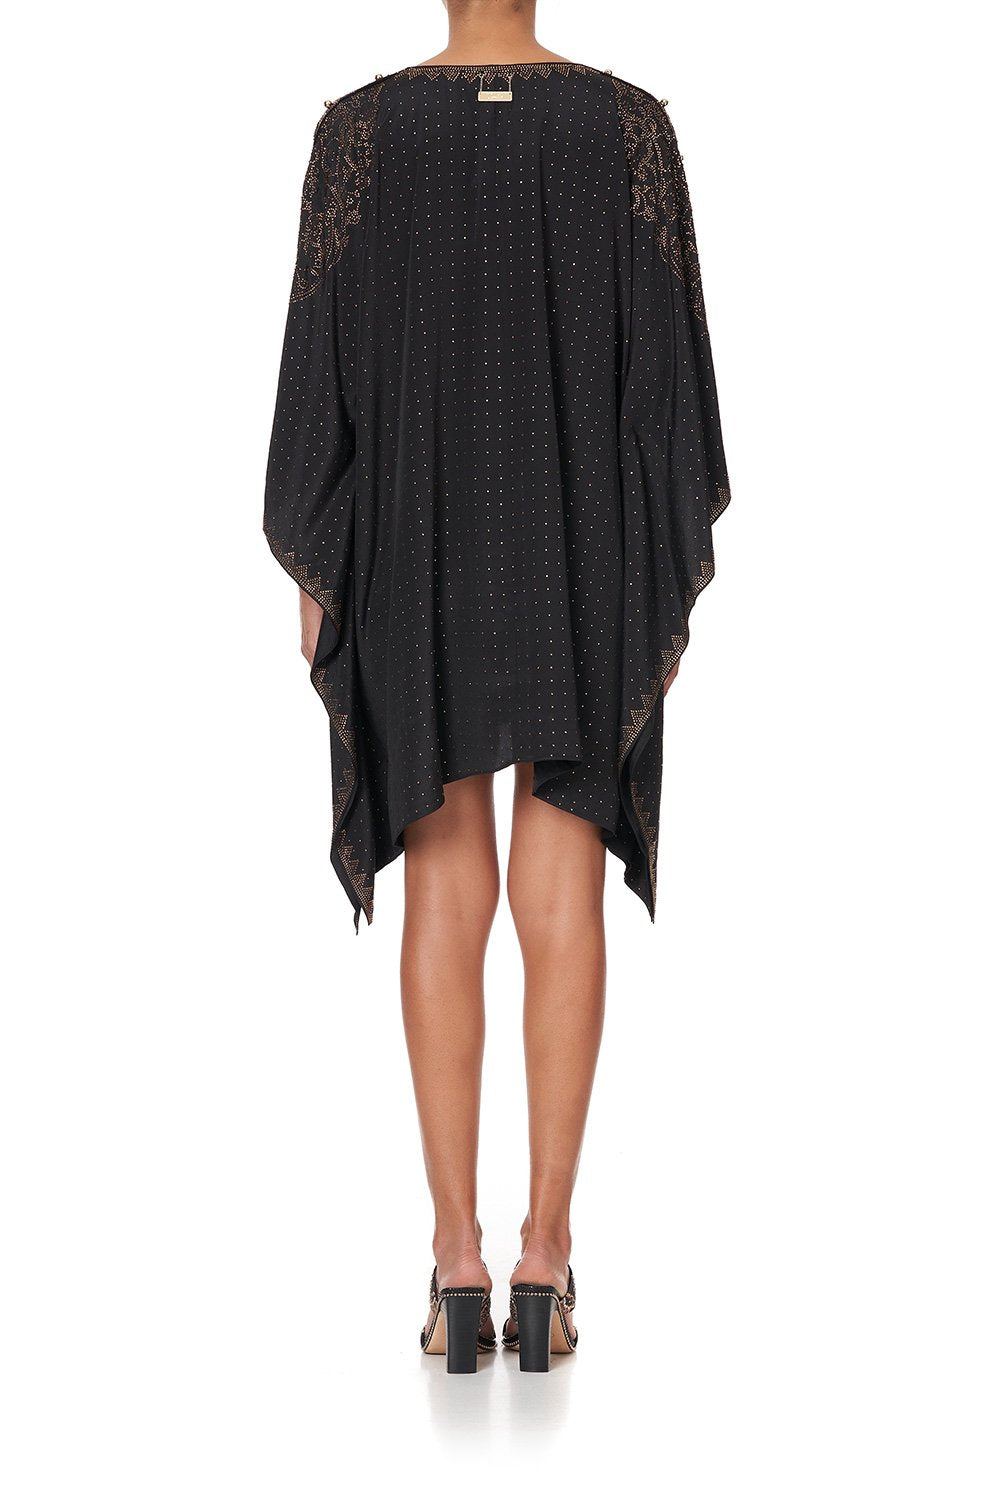 KAFTAN WITH BUTTON UP SLEEVES LUXE BLACK